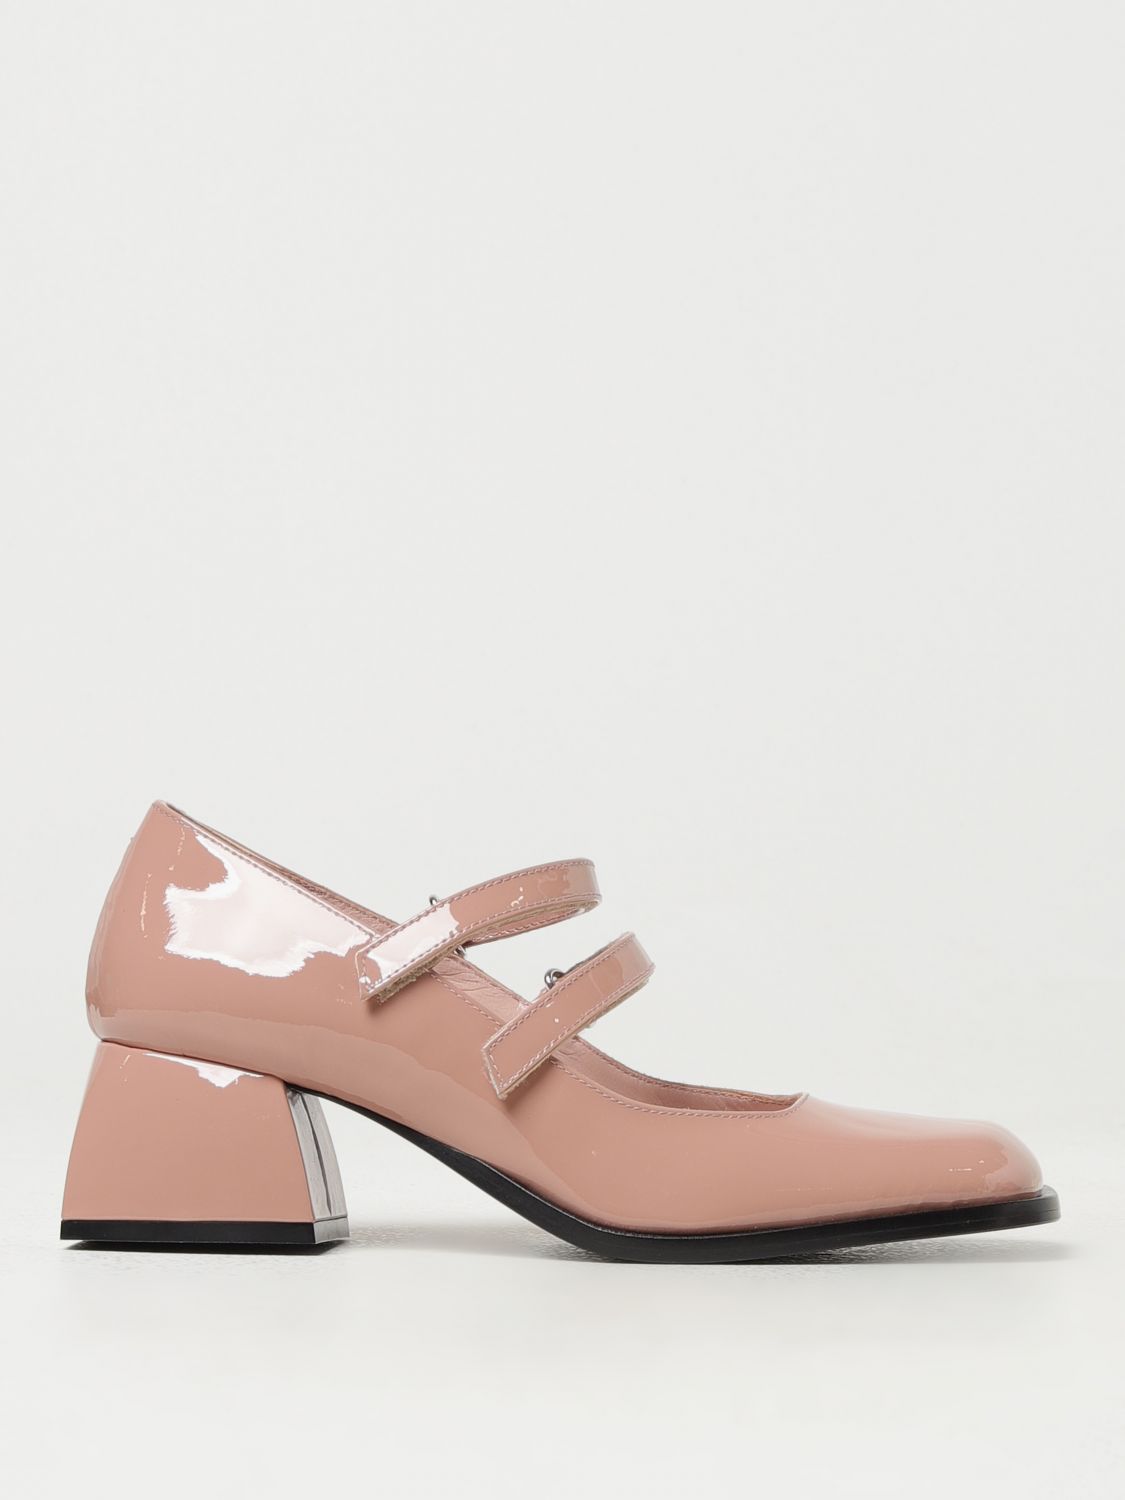 Nodaleto High Heel Shoes  Woman In Blush Pink